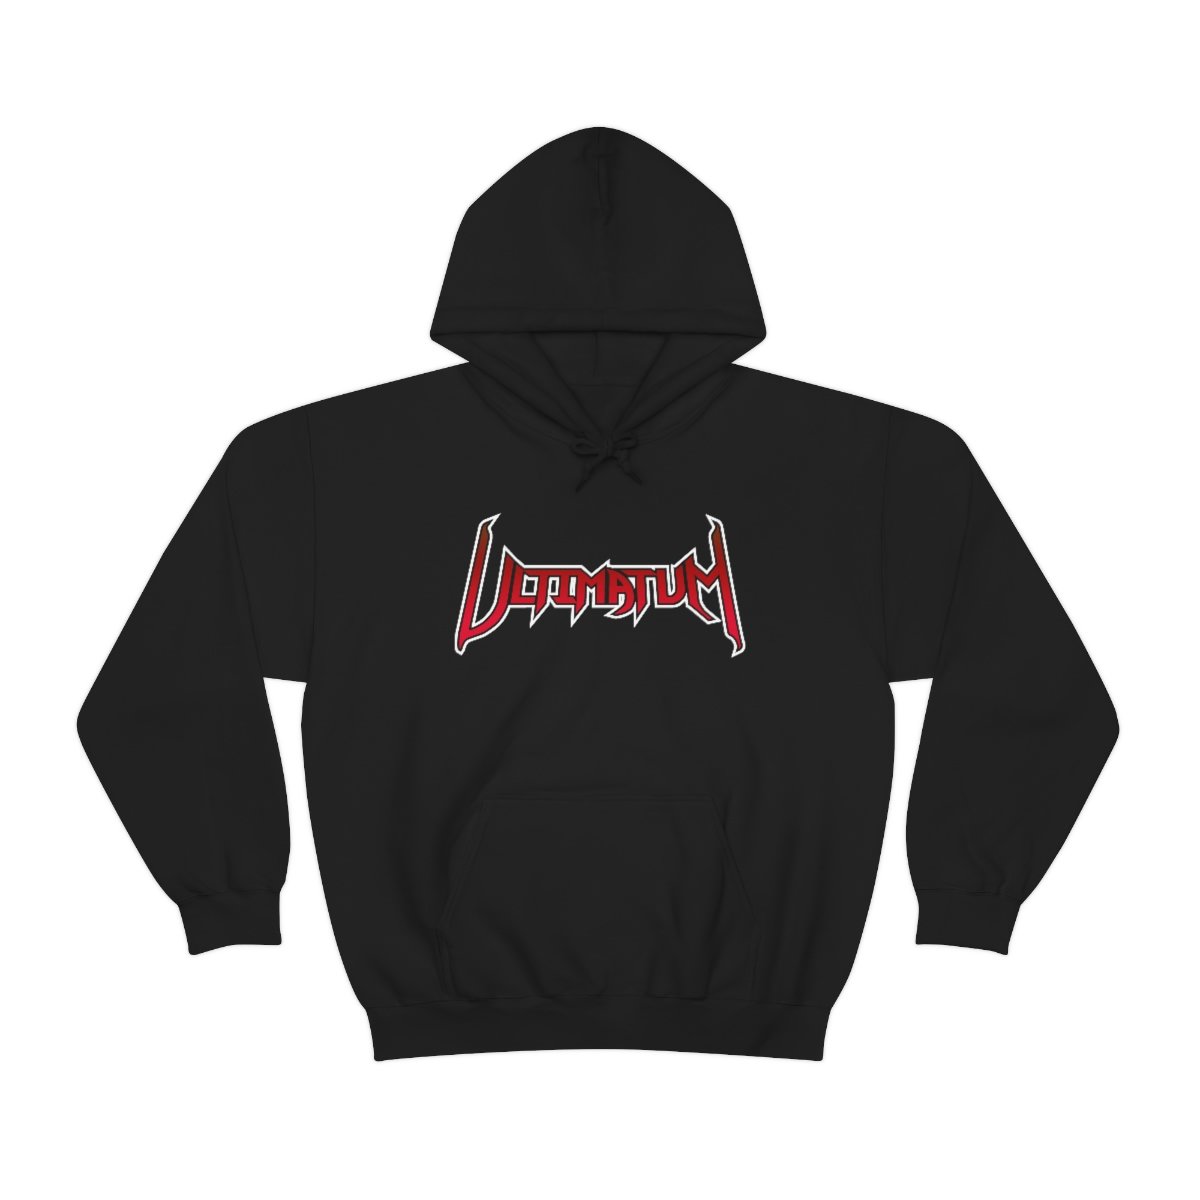 Ultimatum – Our God Reigns V2 Pullover Hooded Sweatshirt